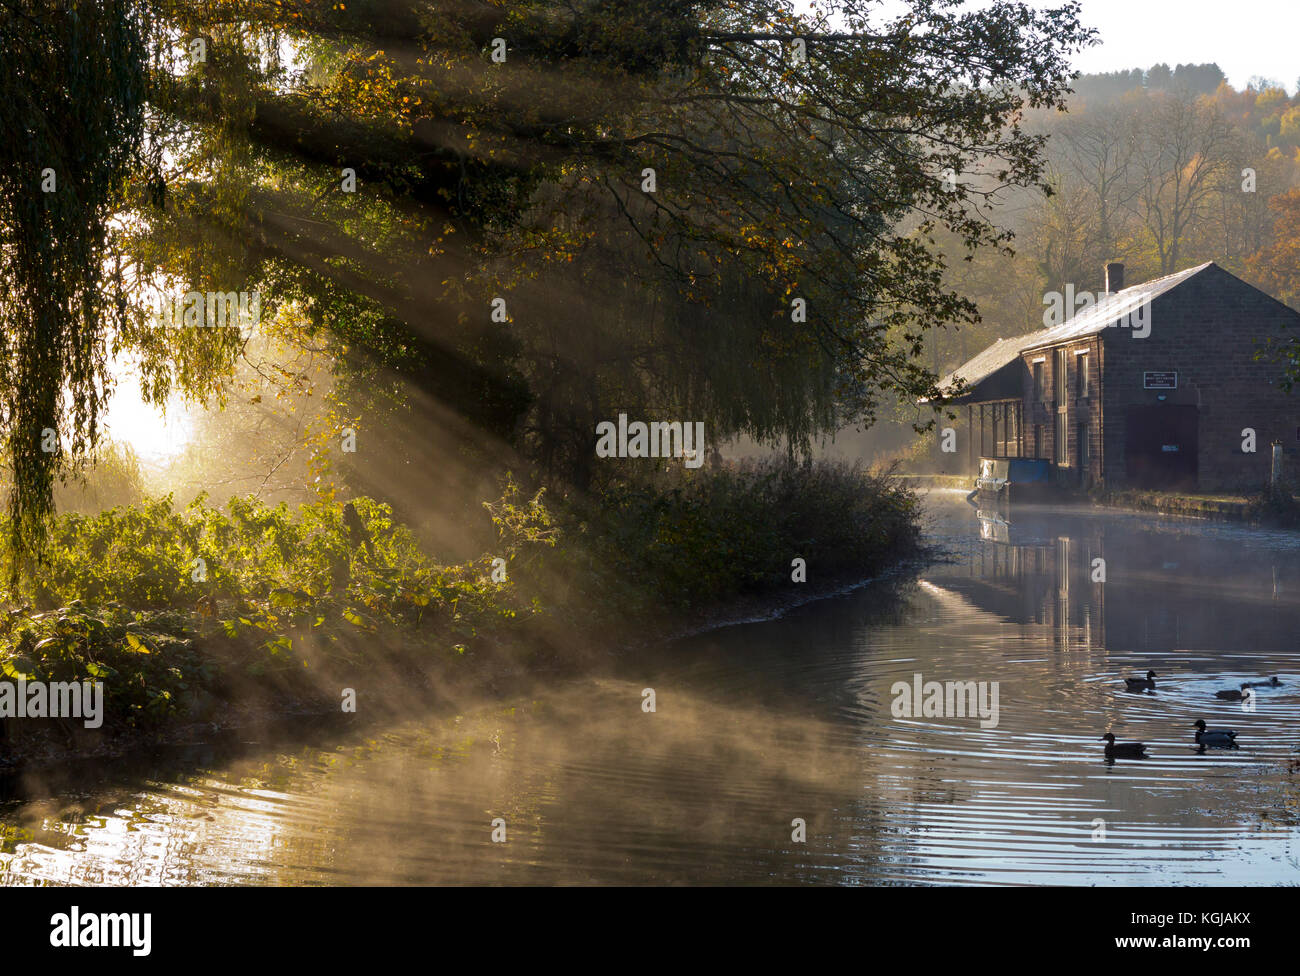 Derbyshire, UK. 08th Nov, 2017. UK Weather - 8th November 2017 - Glorious autumn sunshine on the Cromford Canal in the Derbyshire Peak District with ducks enjoying a beautiful day. Credit: Robert Morris/Alamy Live News Stock Photo